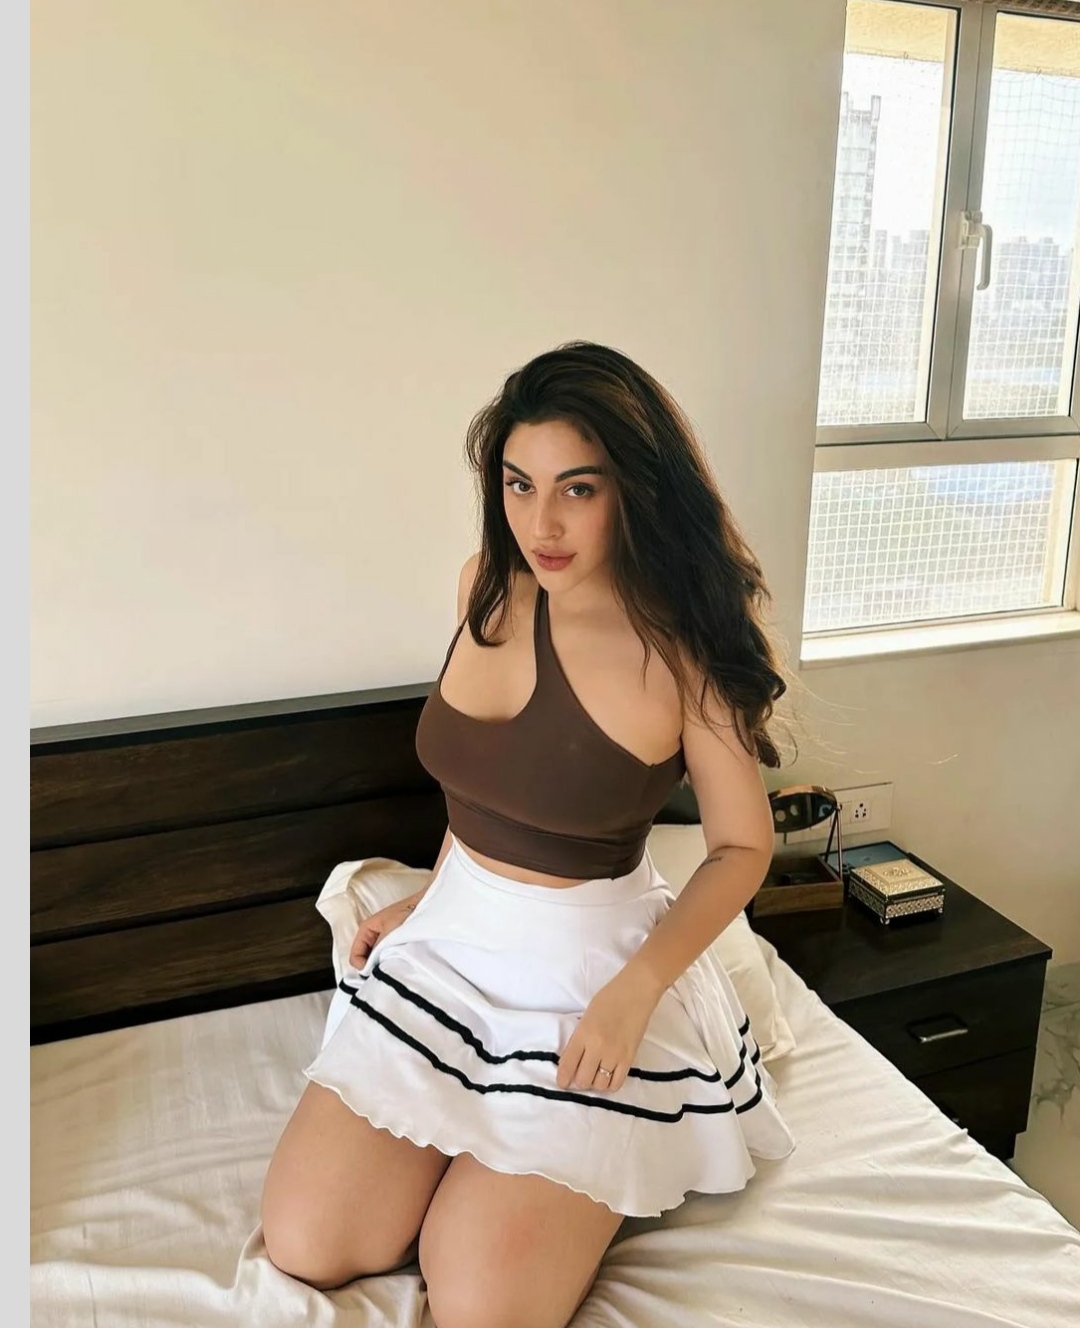 Chennai best girl Incall and outcall services available.